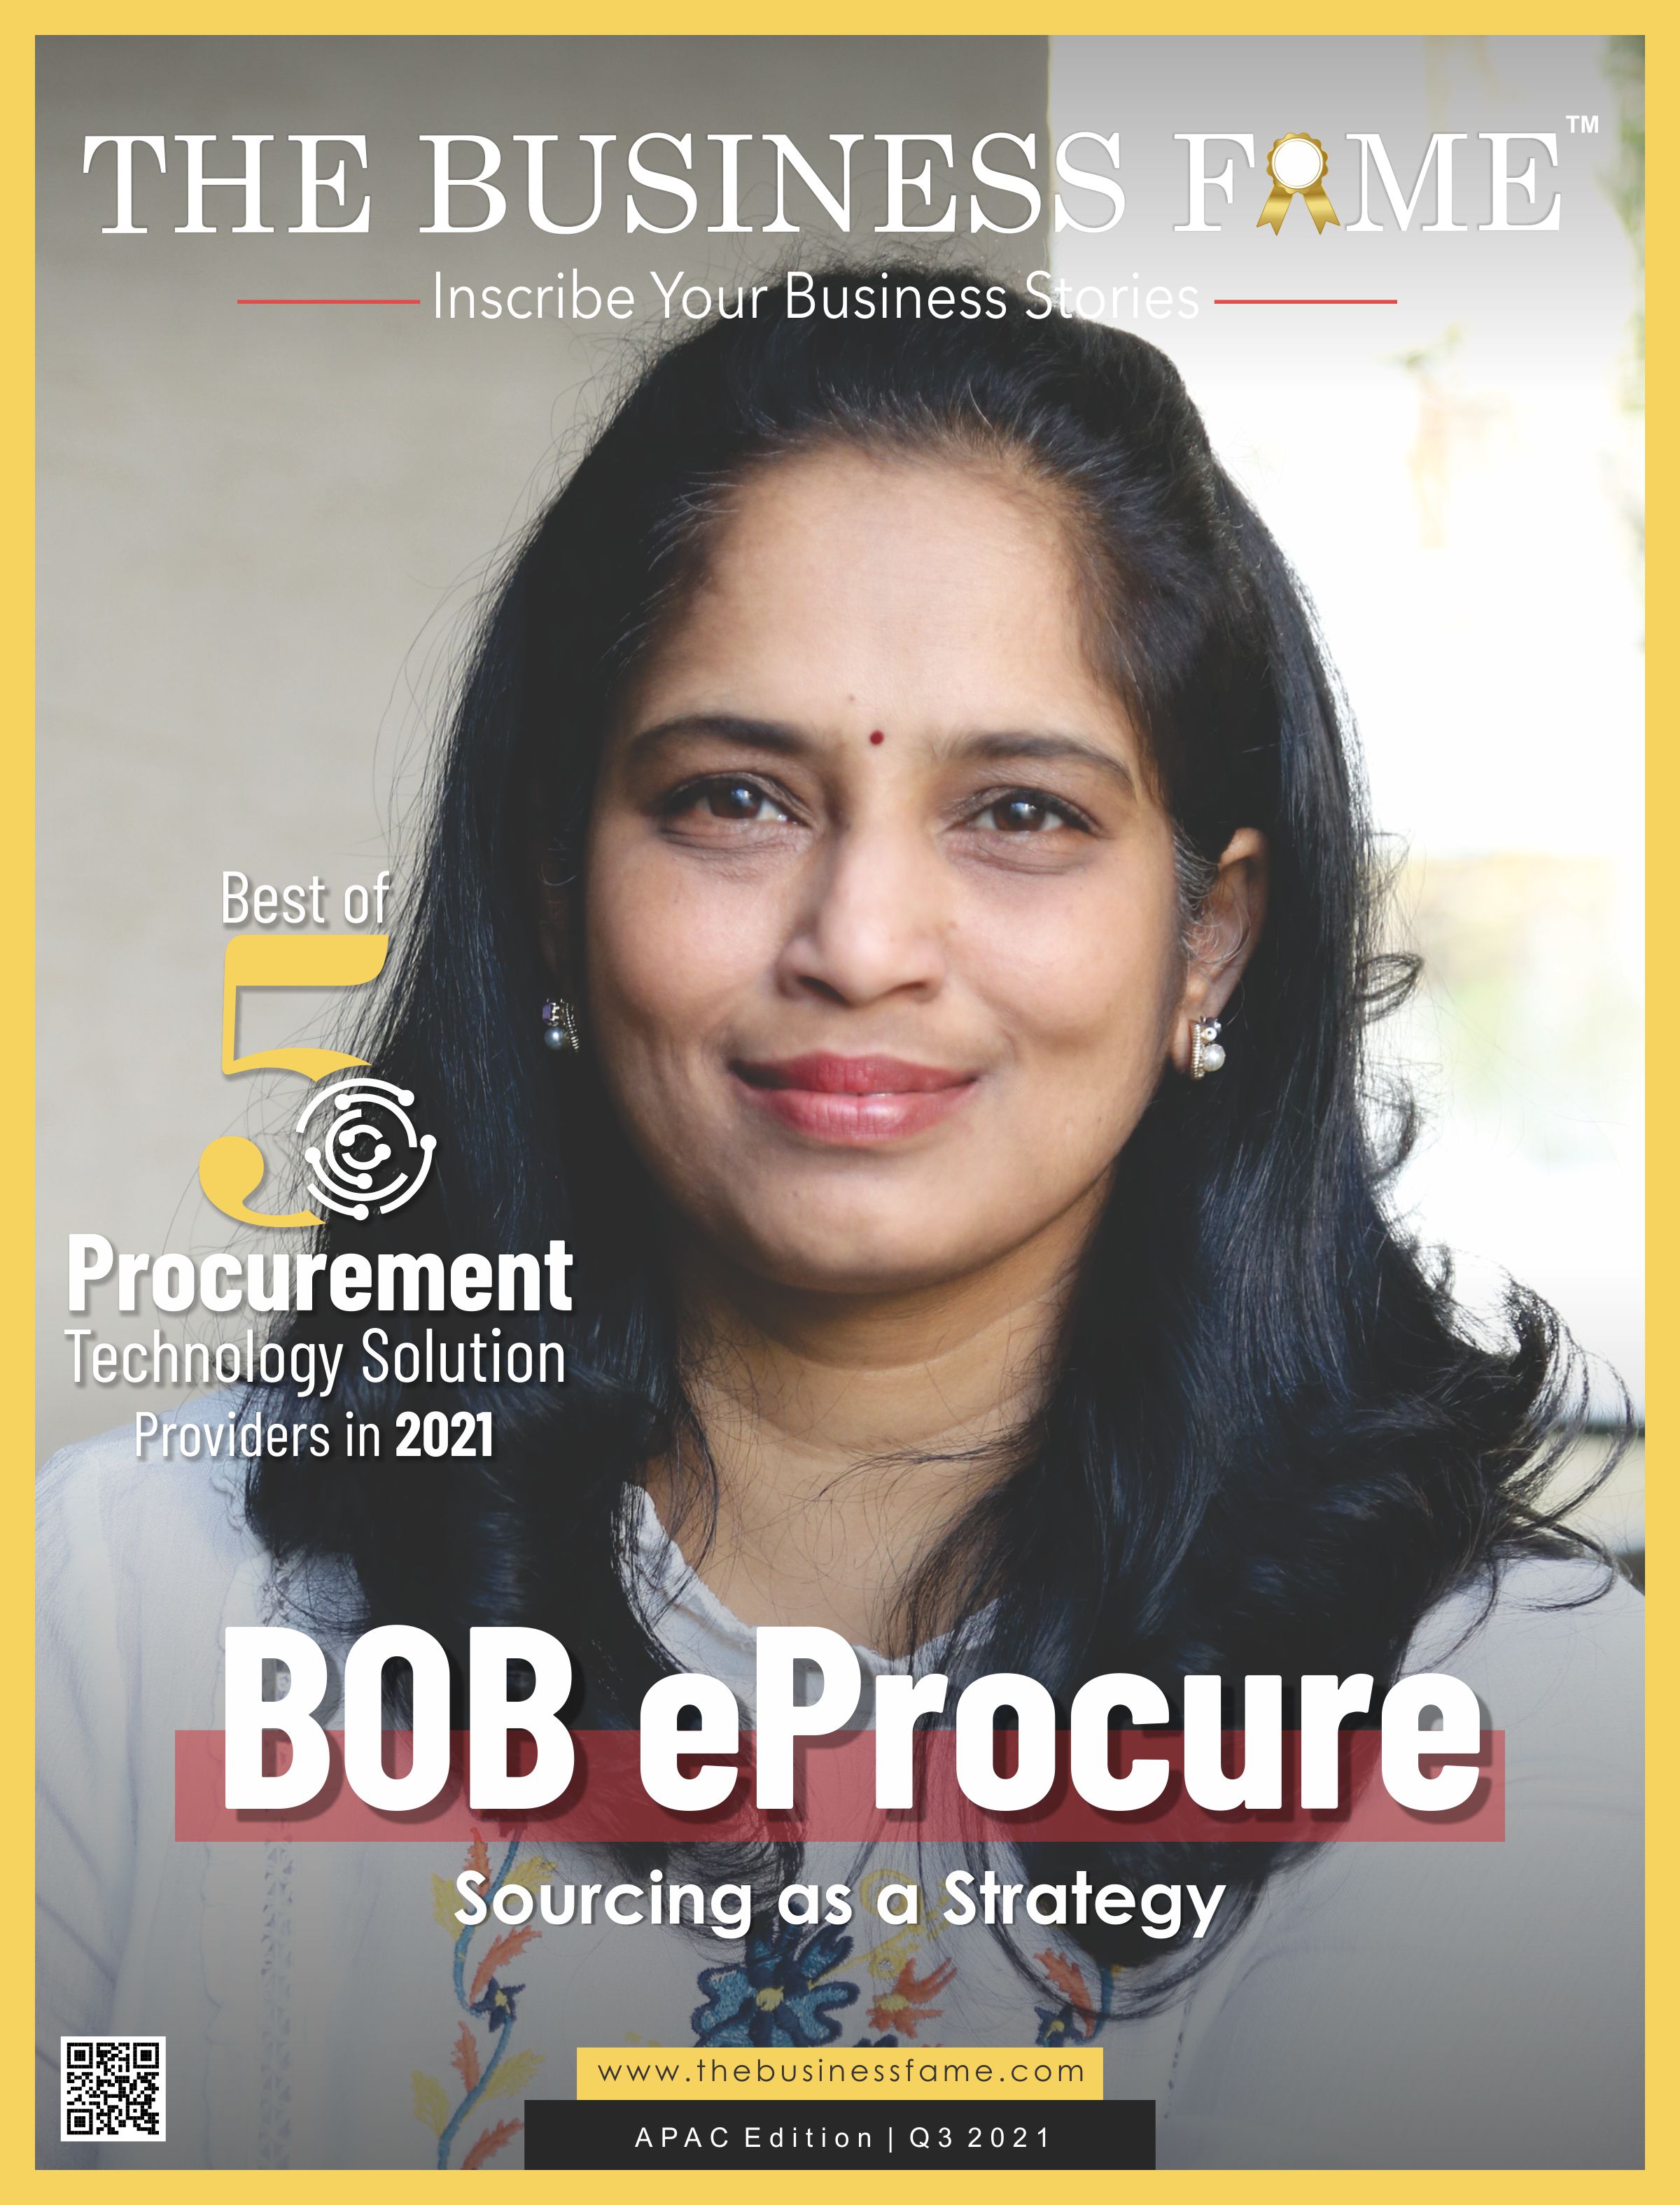 Best of 5 Procurement Technology Solution Providers in 2021